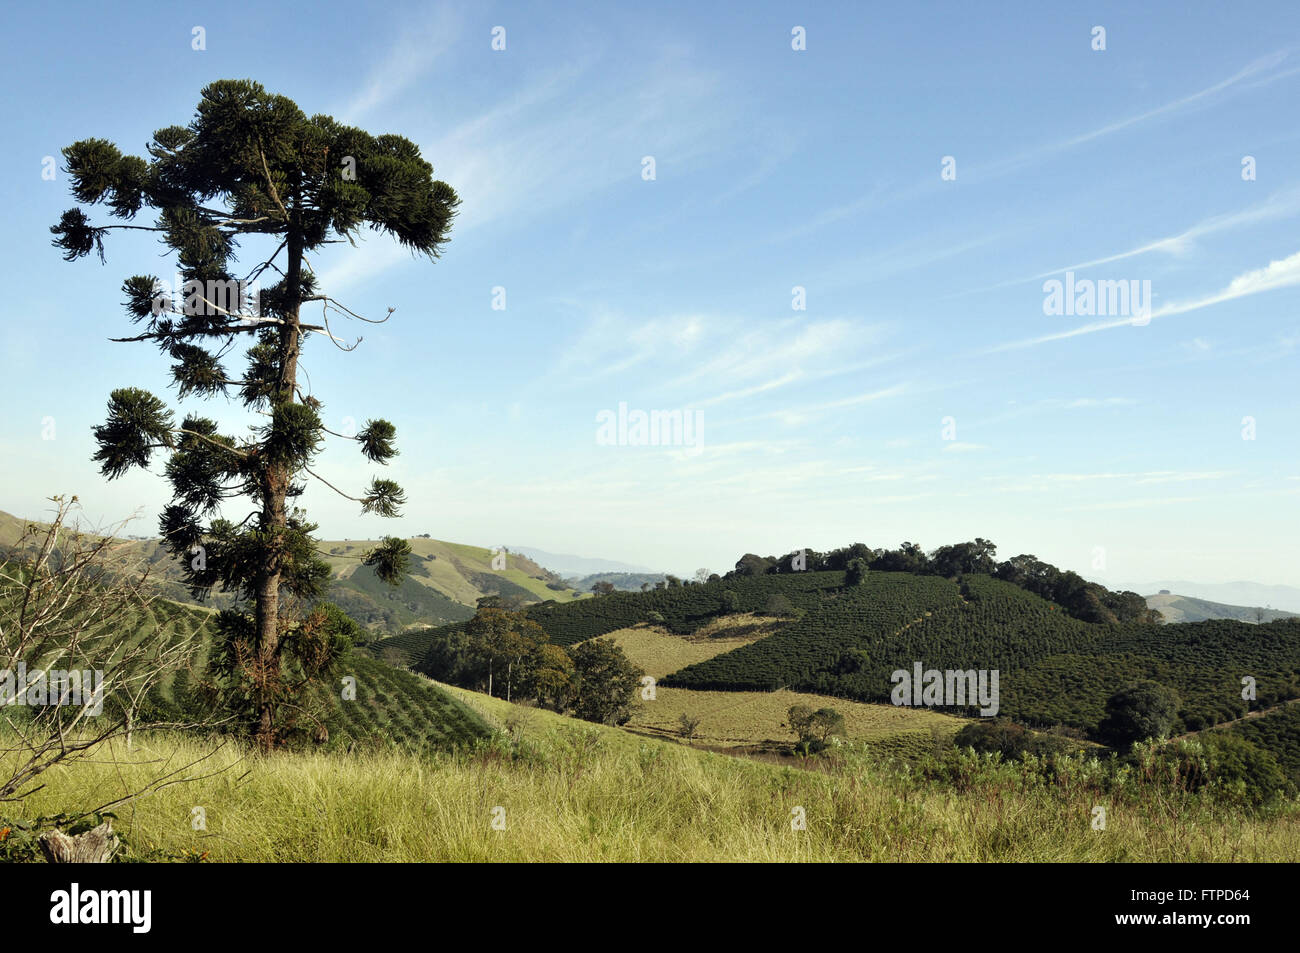 Araucaria plantation and the background in the rural town of Bueno Brandao Stock Photo